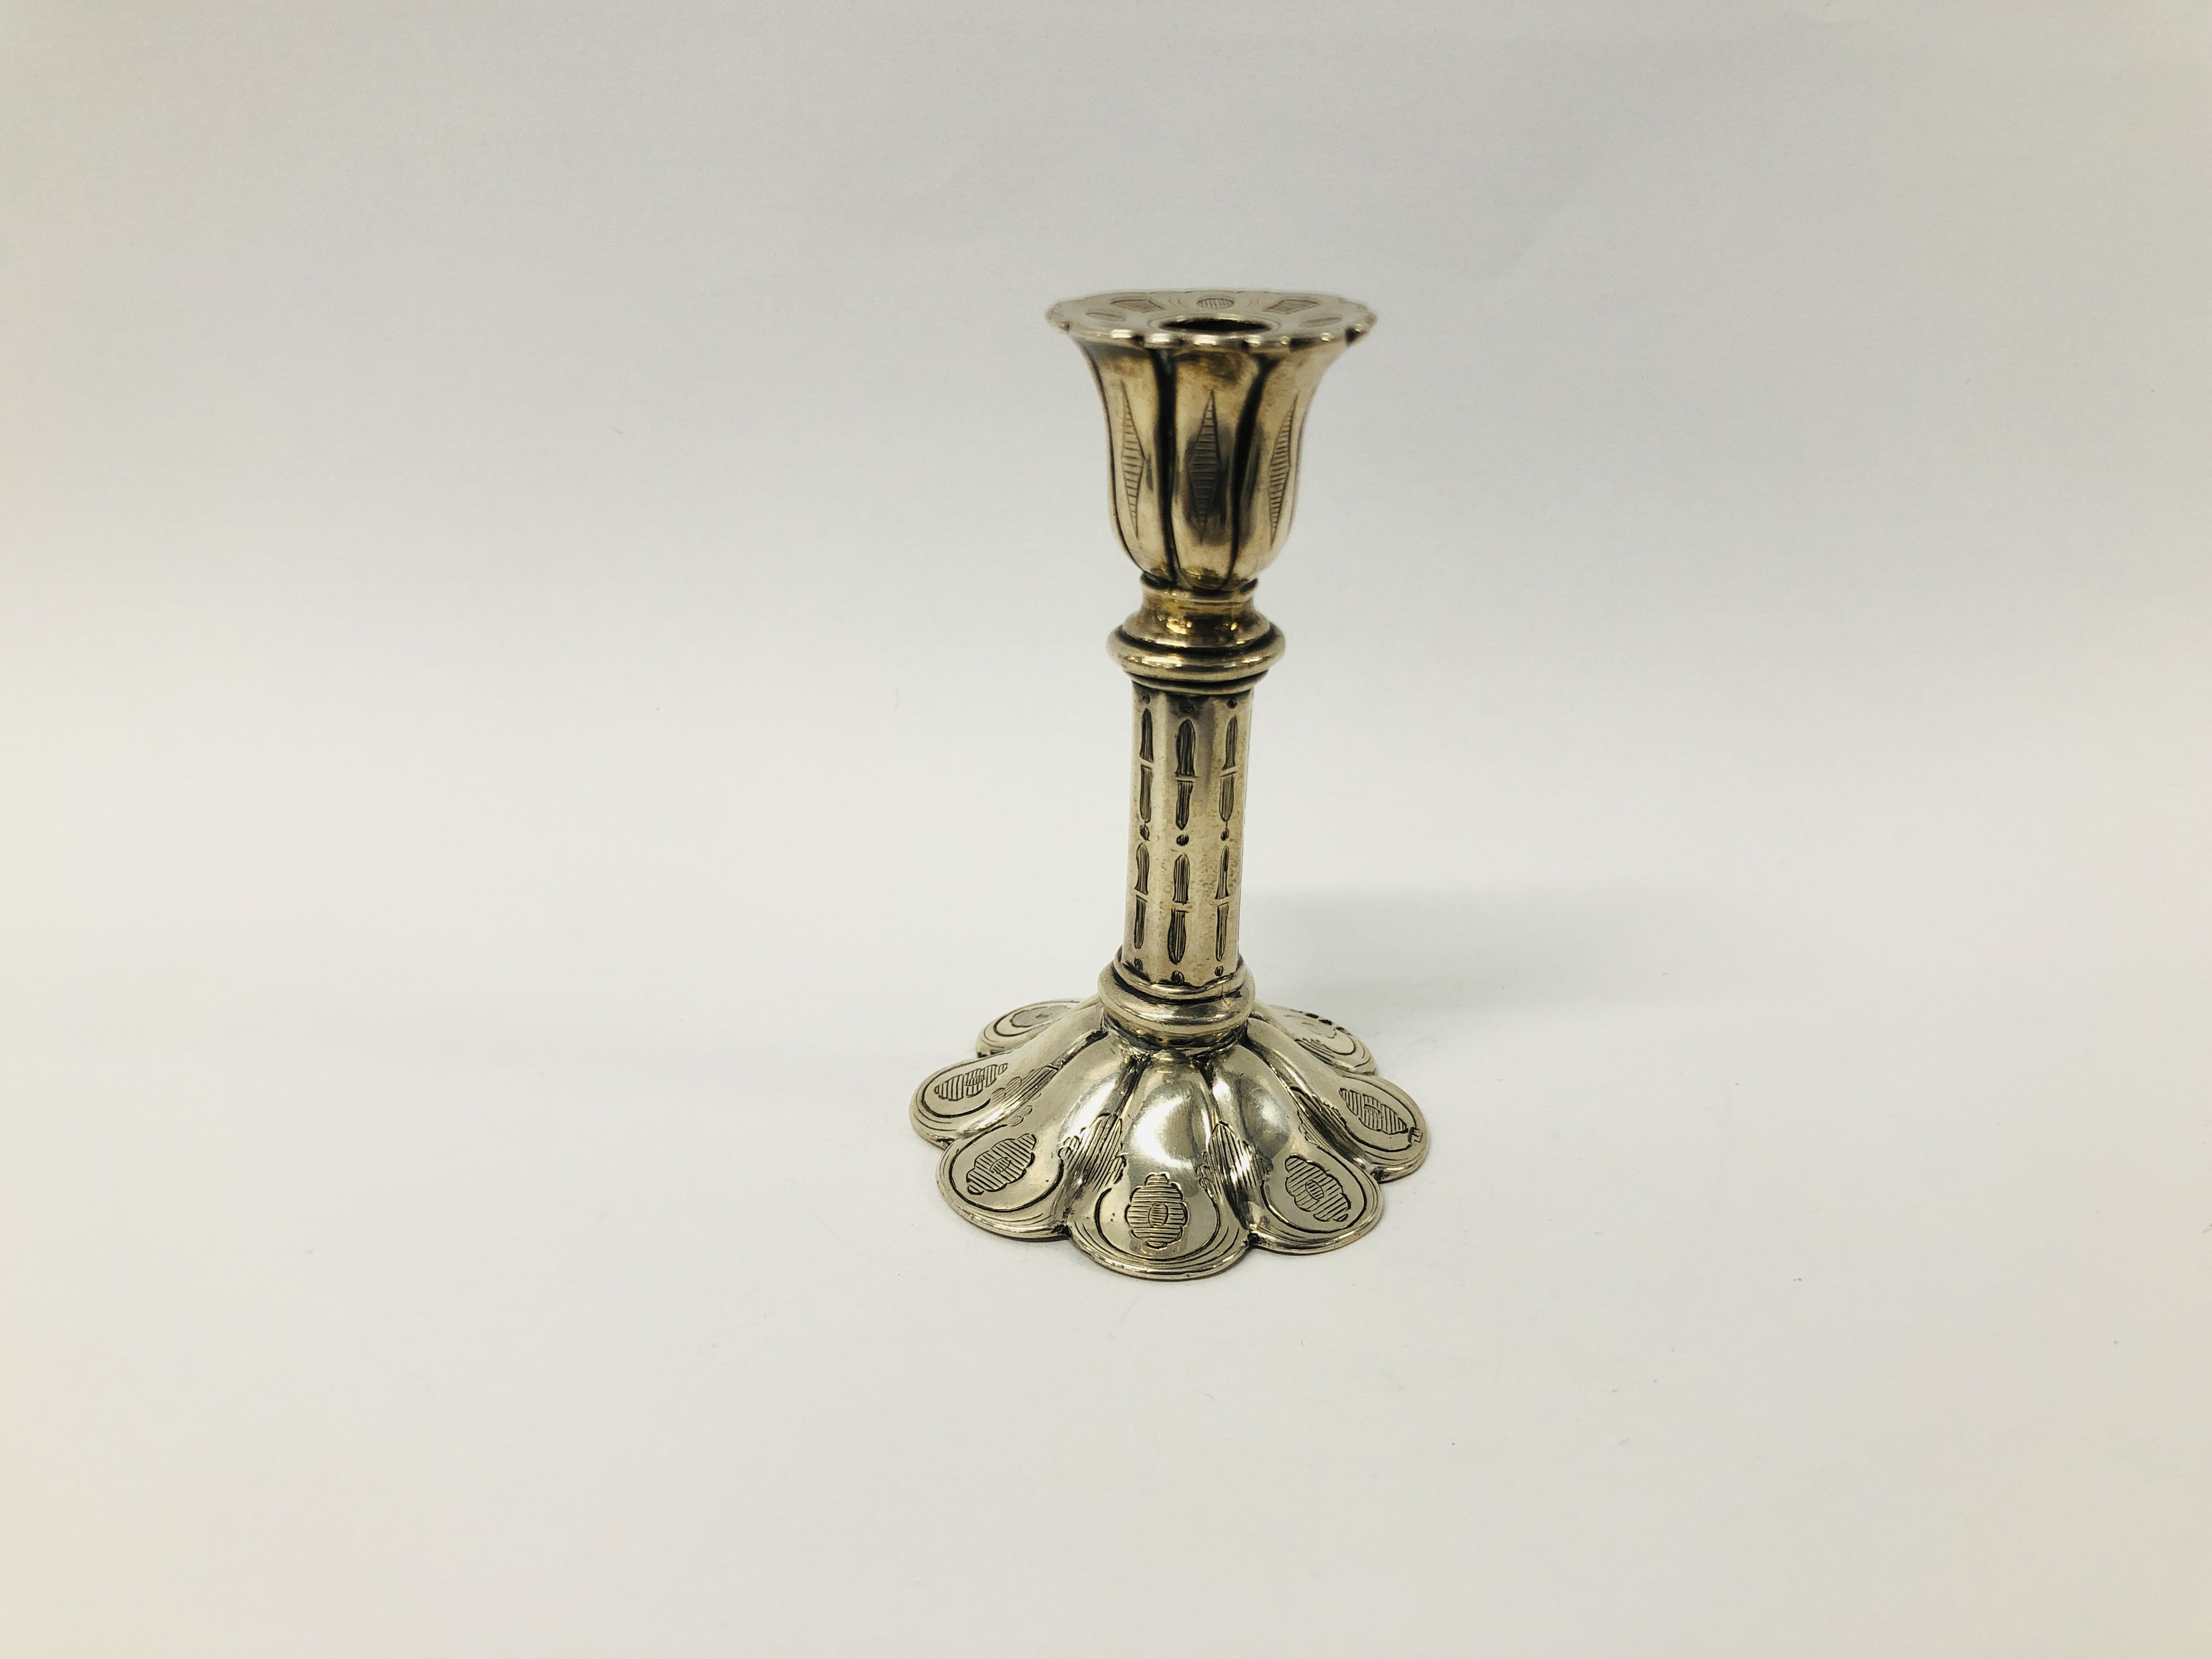 A VICTORIAN SILVER TAPER STICK ON A PETAL BASE LONDON 1853, WILLIAM SMILY H 8.5CM.